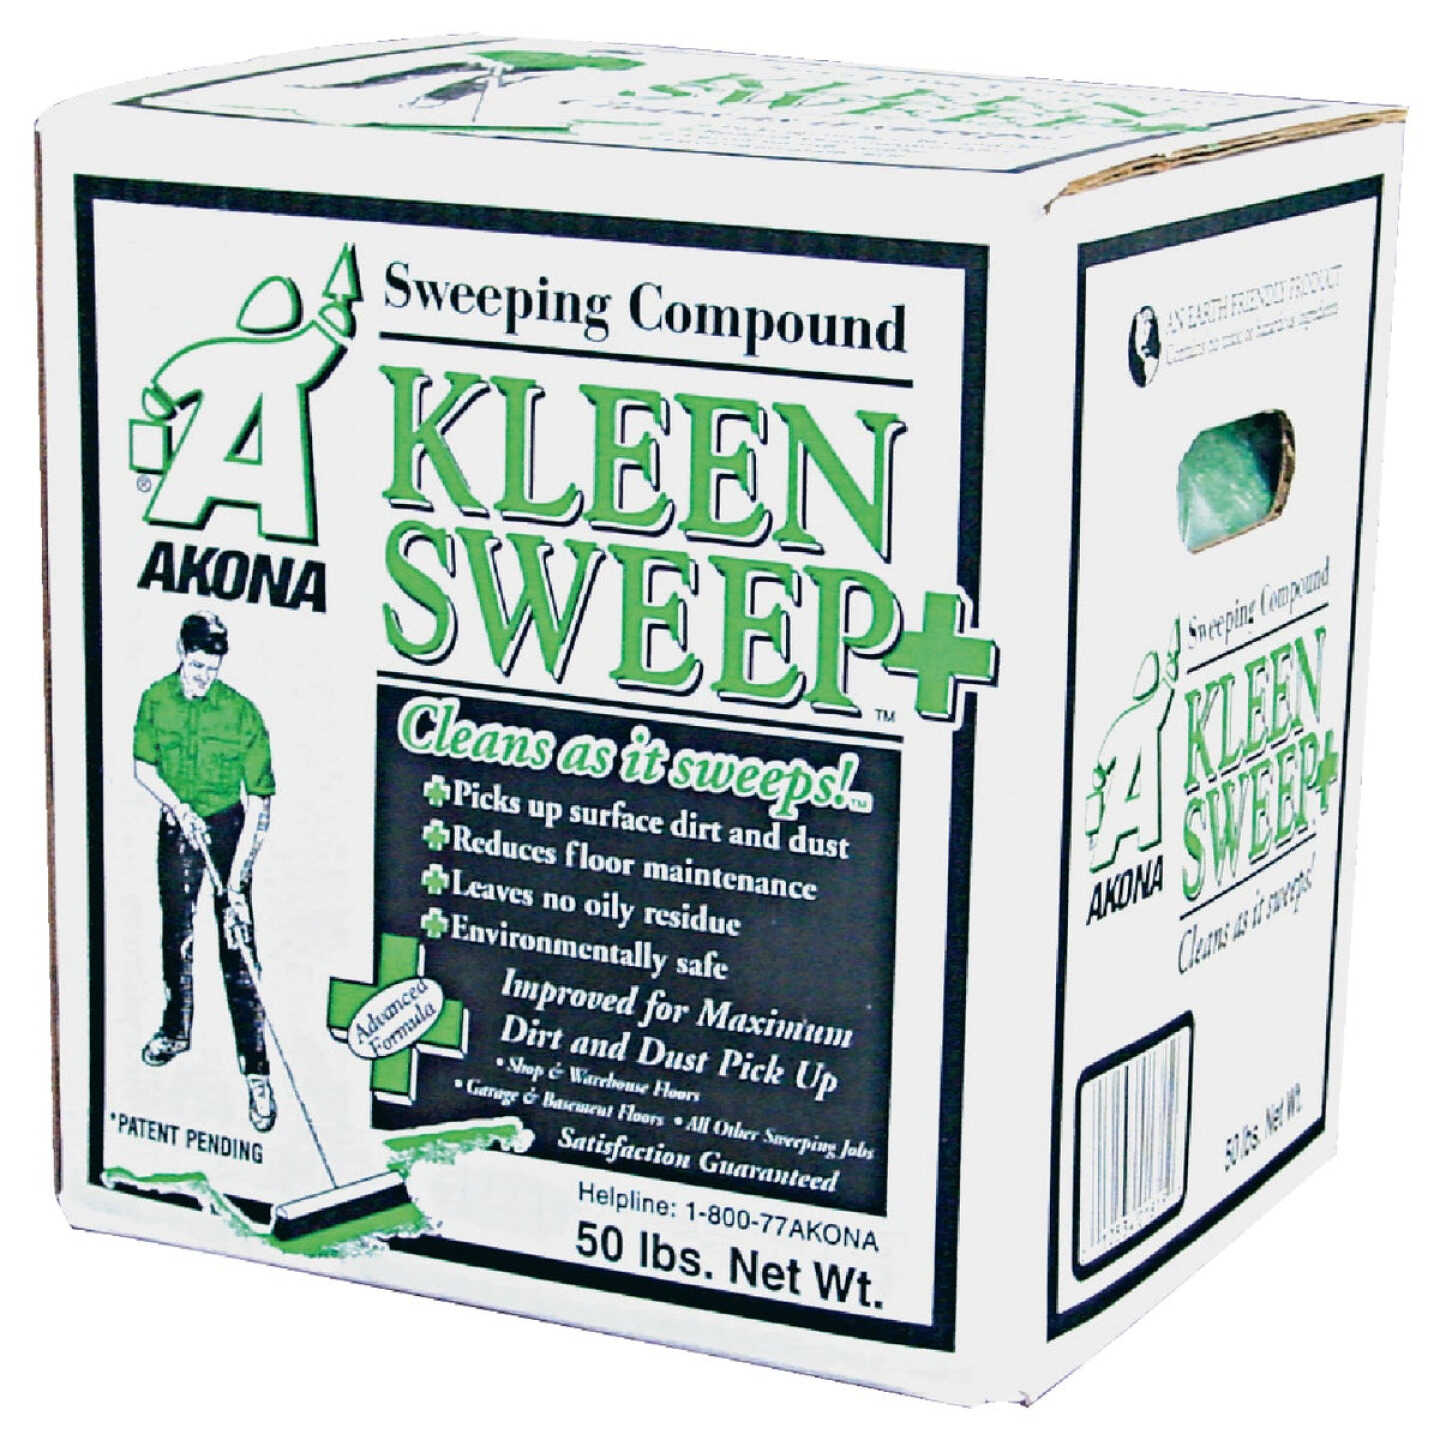 Kleen Sweep 50 Lb. Sweeping Compound Image 1